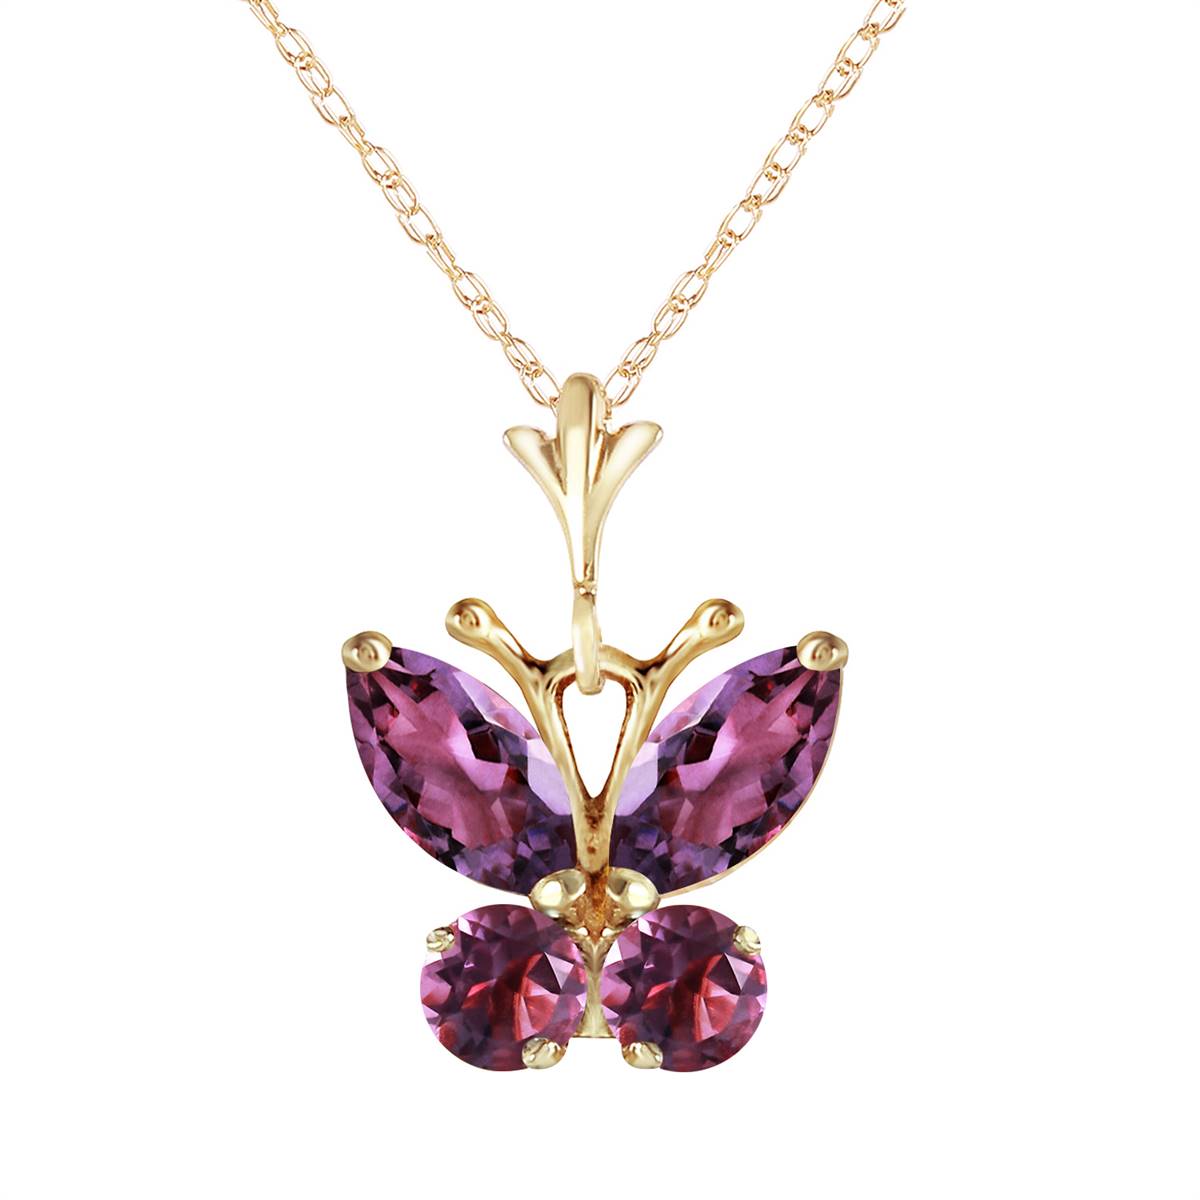 0.6 Carat 14K Solid Yellow Gold Butterfly Necklace Purple Amethyst